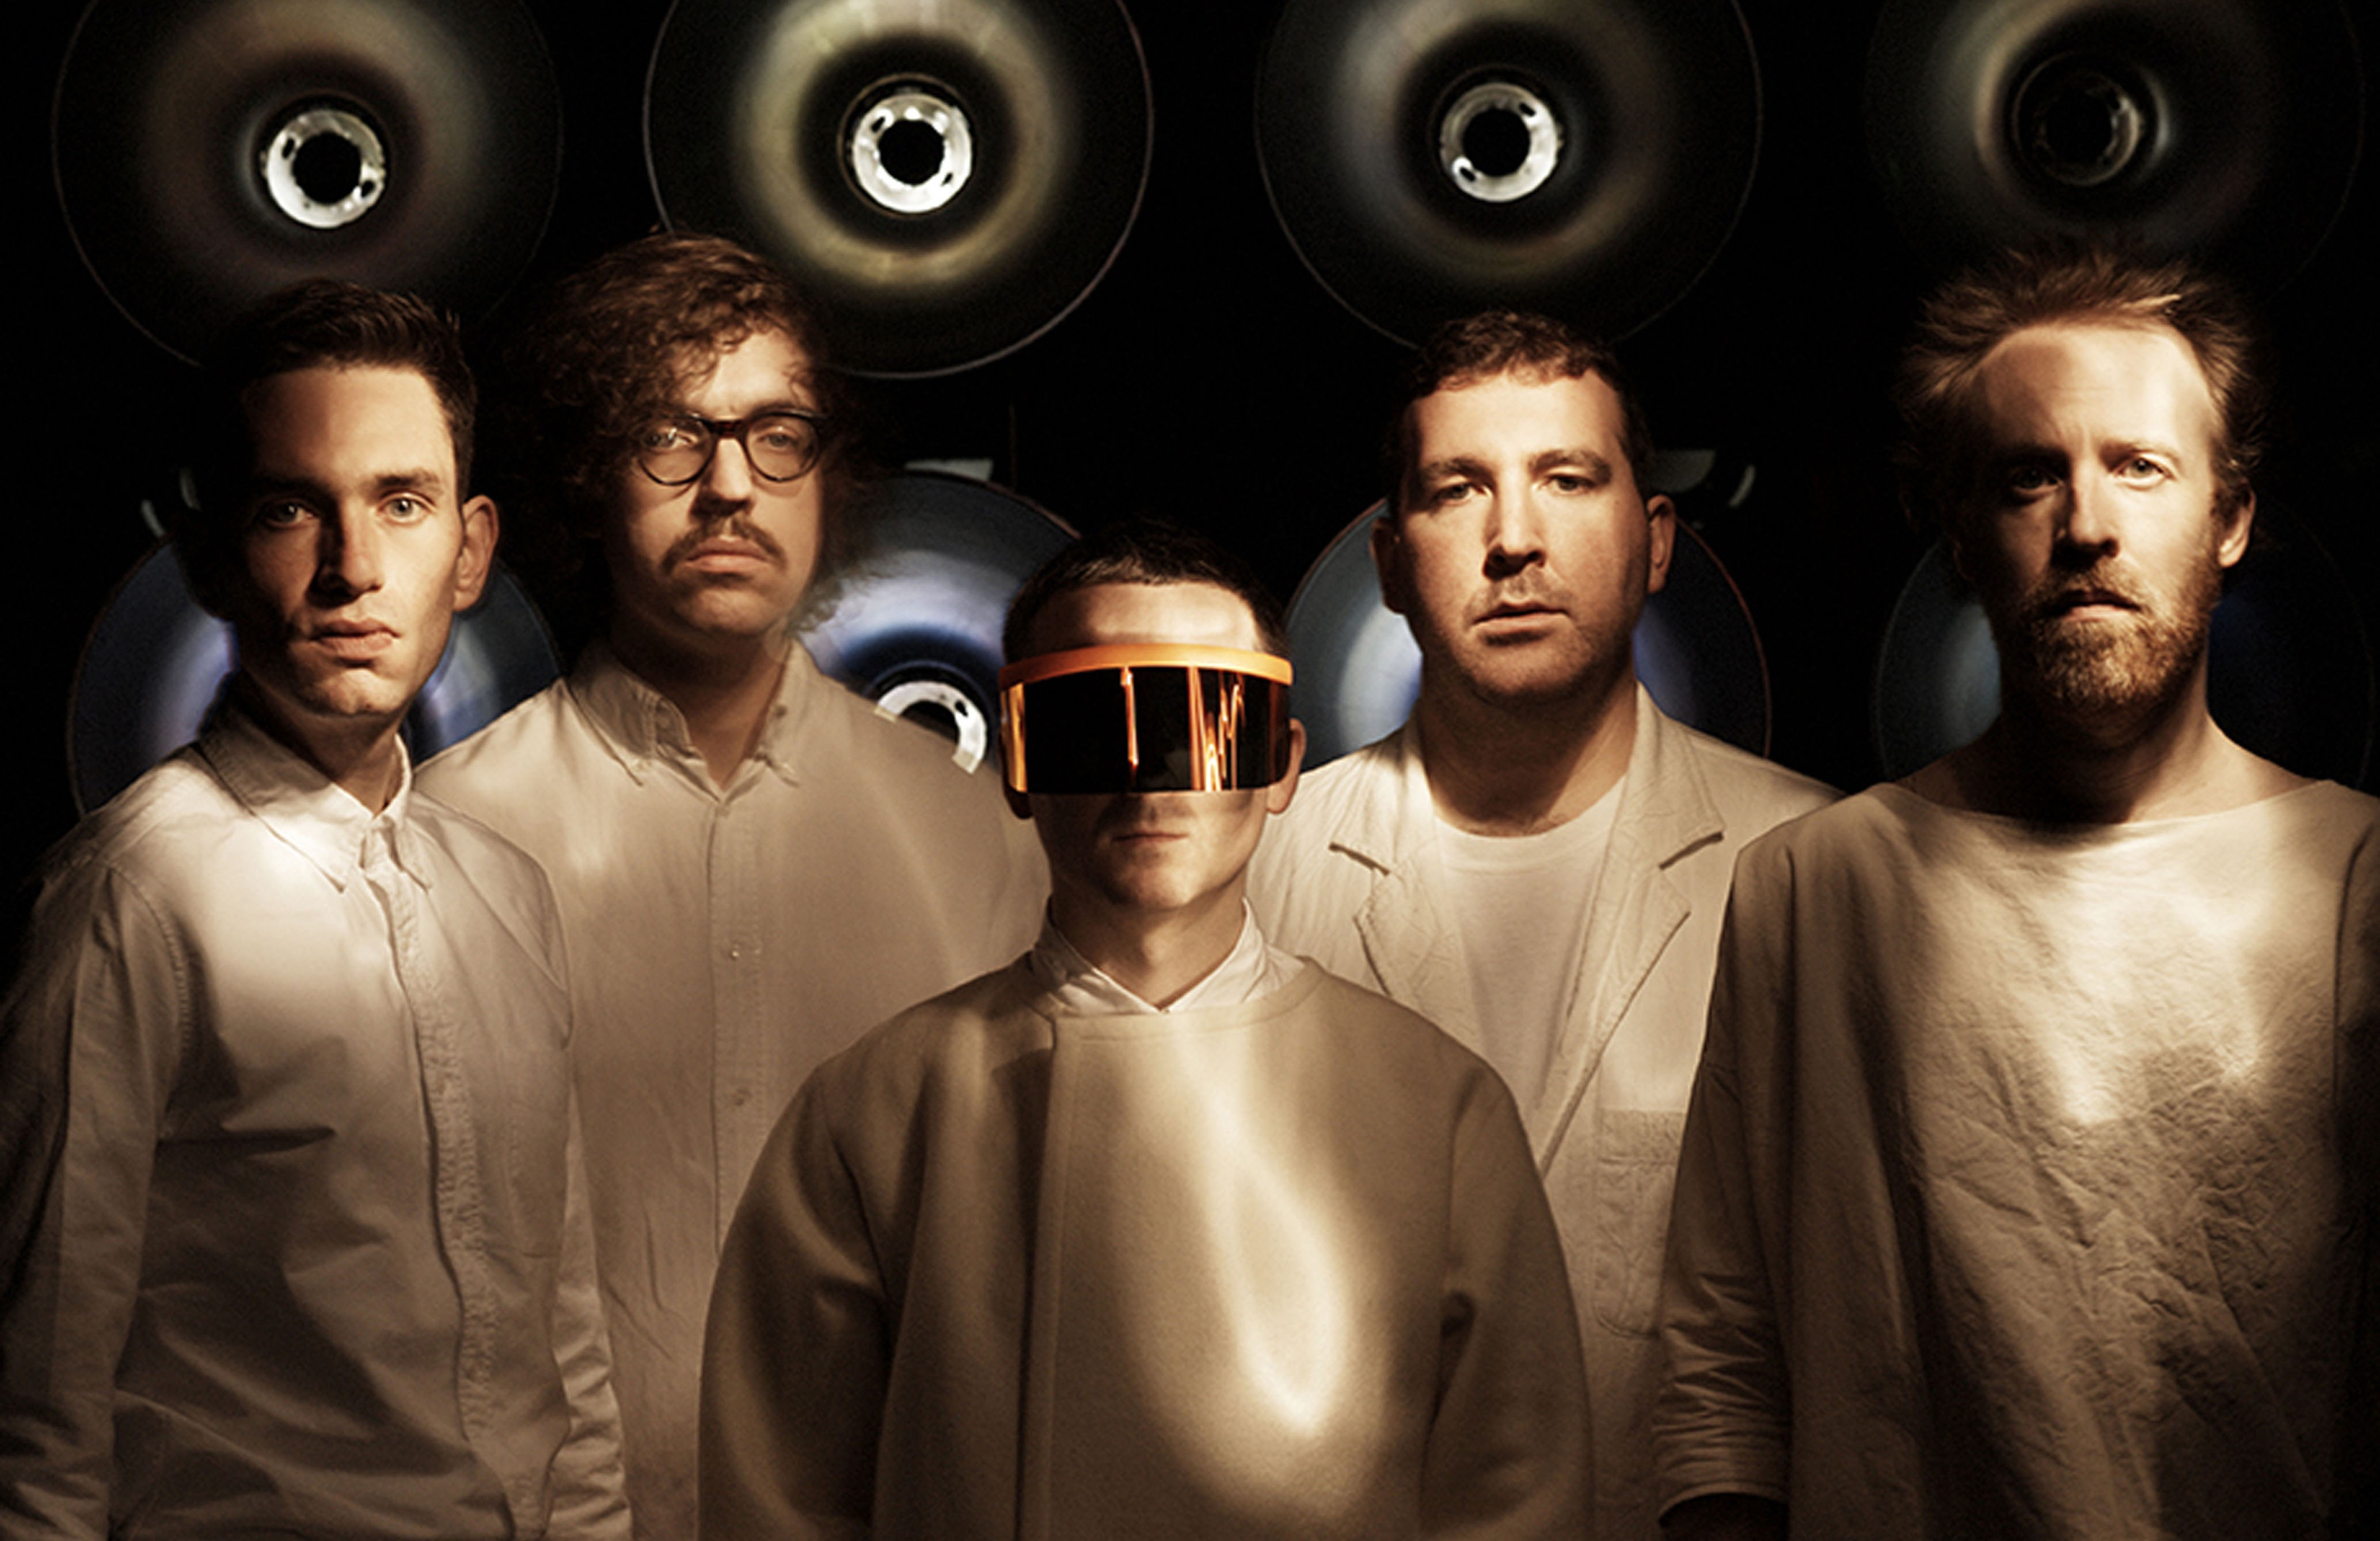 Hot Chip cover Bruce Springsteen's "Dancing in the dark" with video, new EP with re-work of "Cry For You"